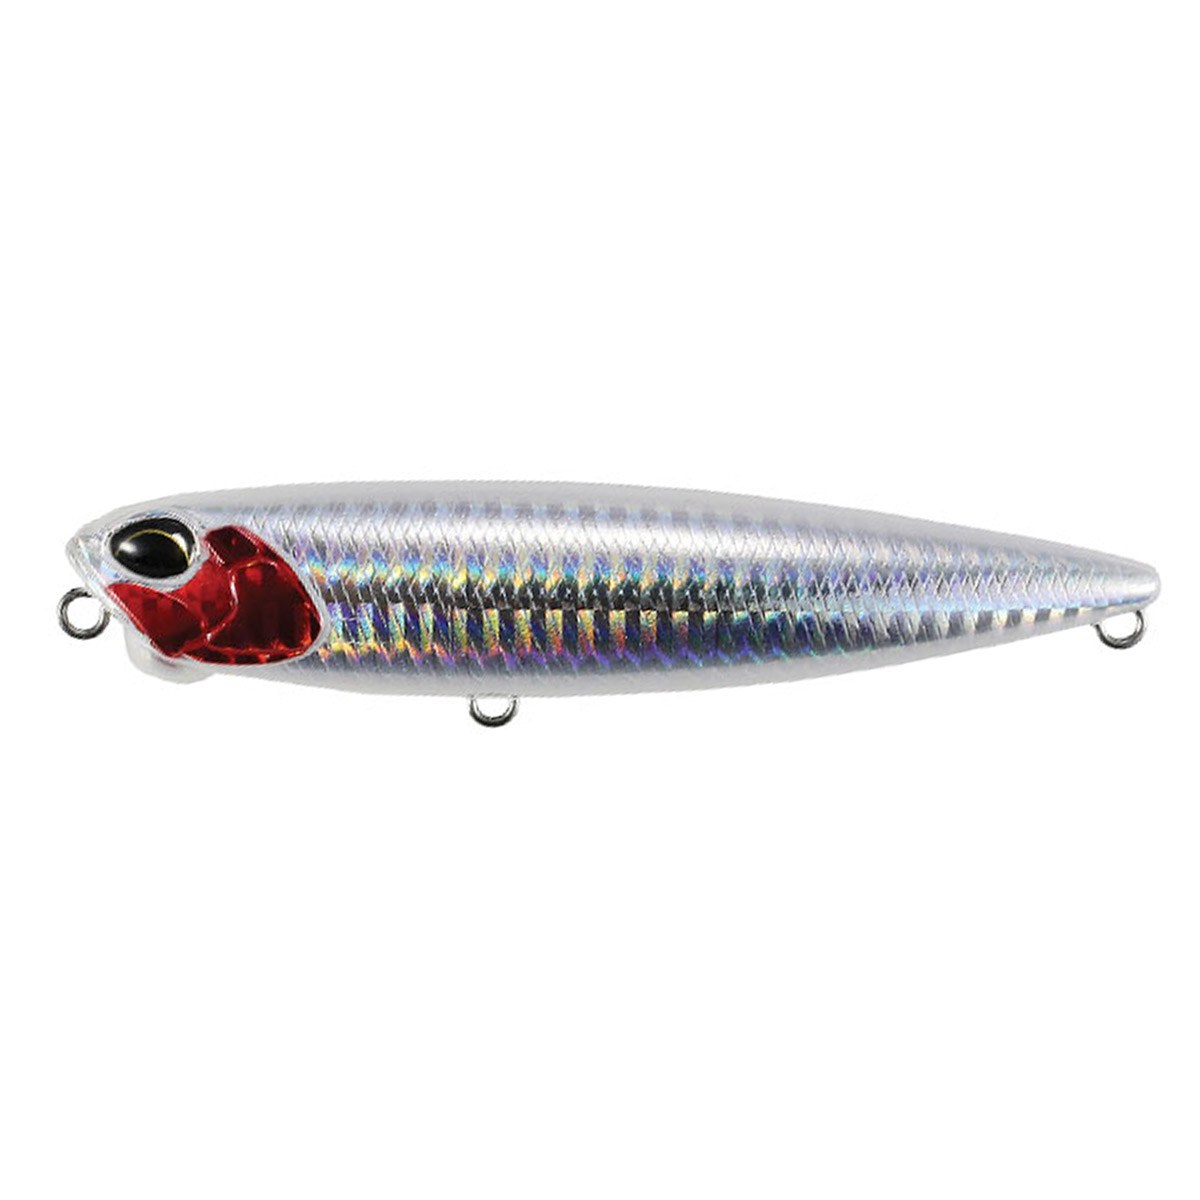 Duo Realis Pencil 85 SW -  Prism Ivory